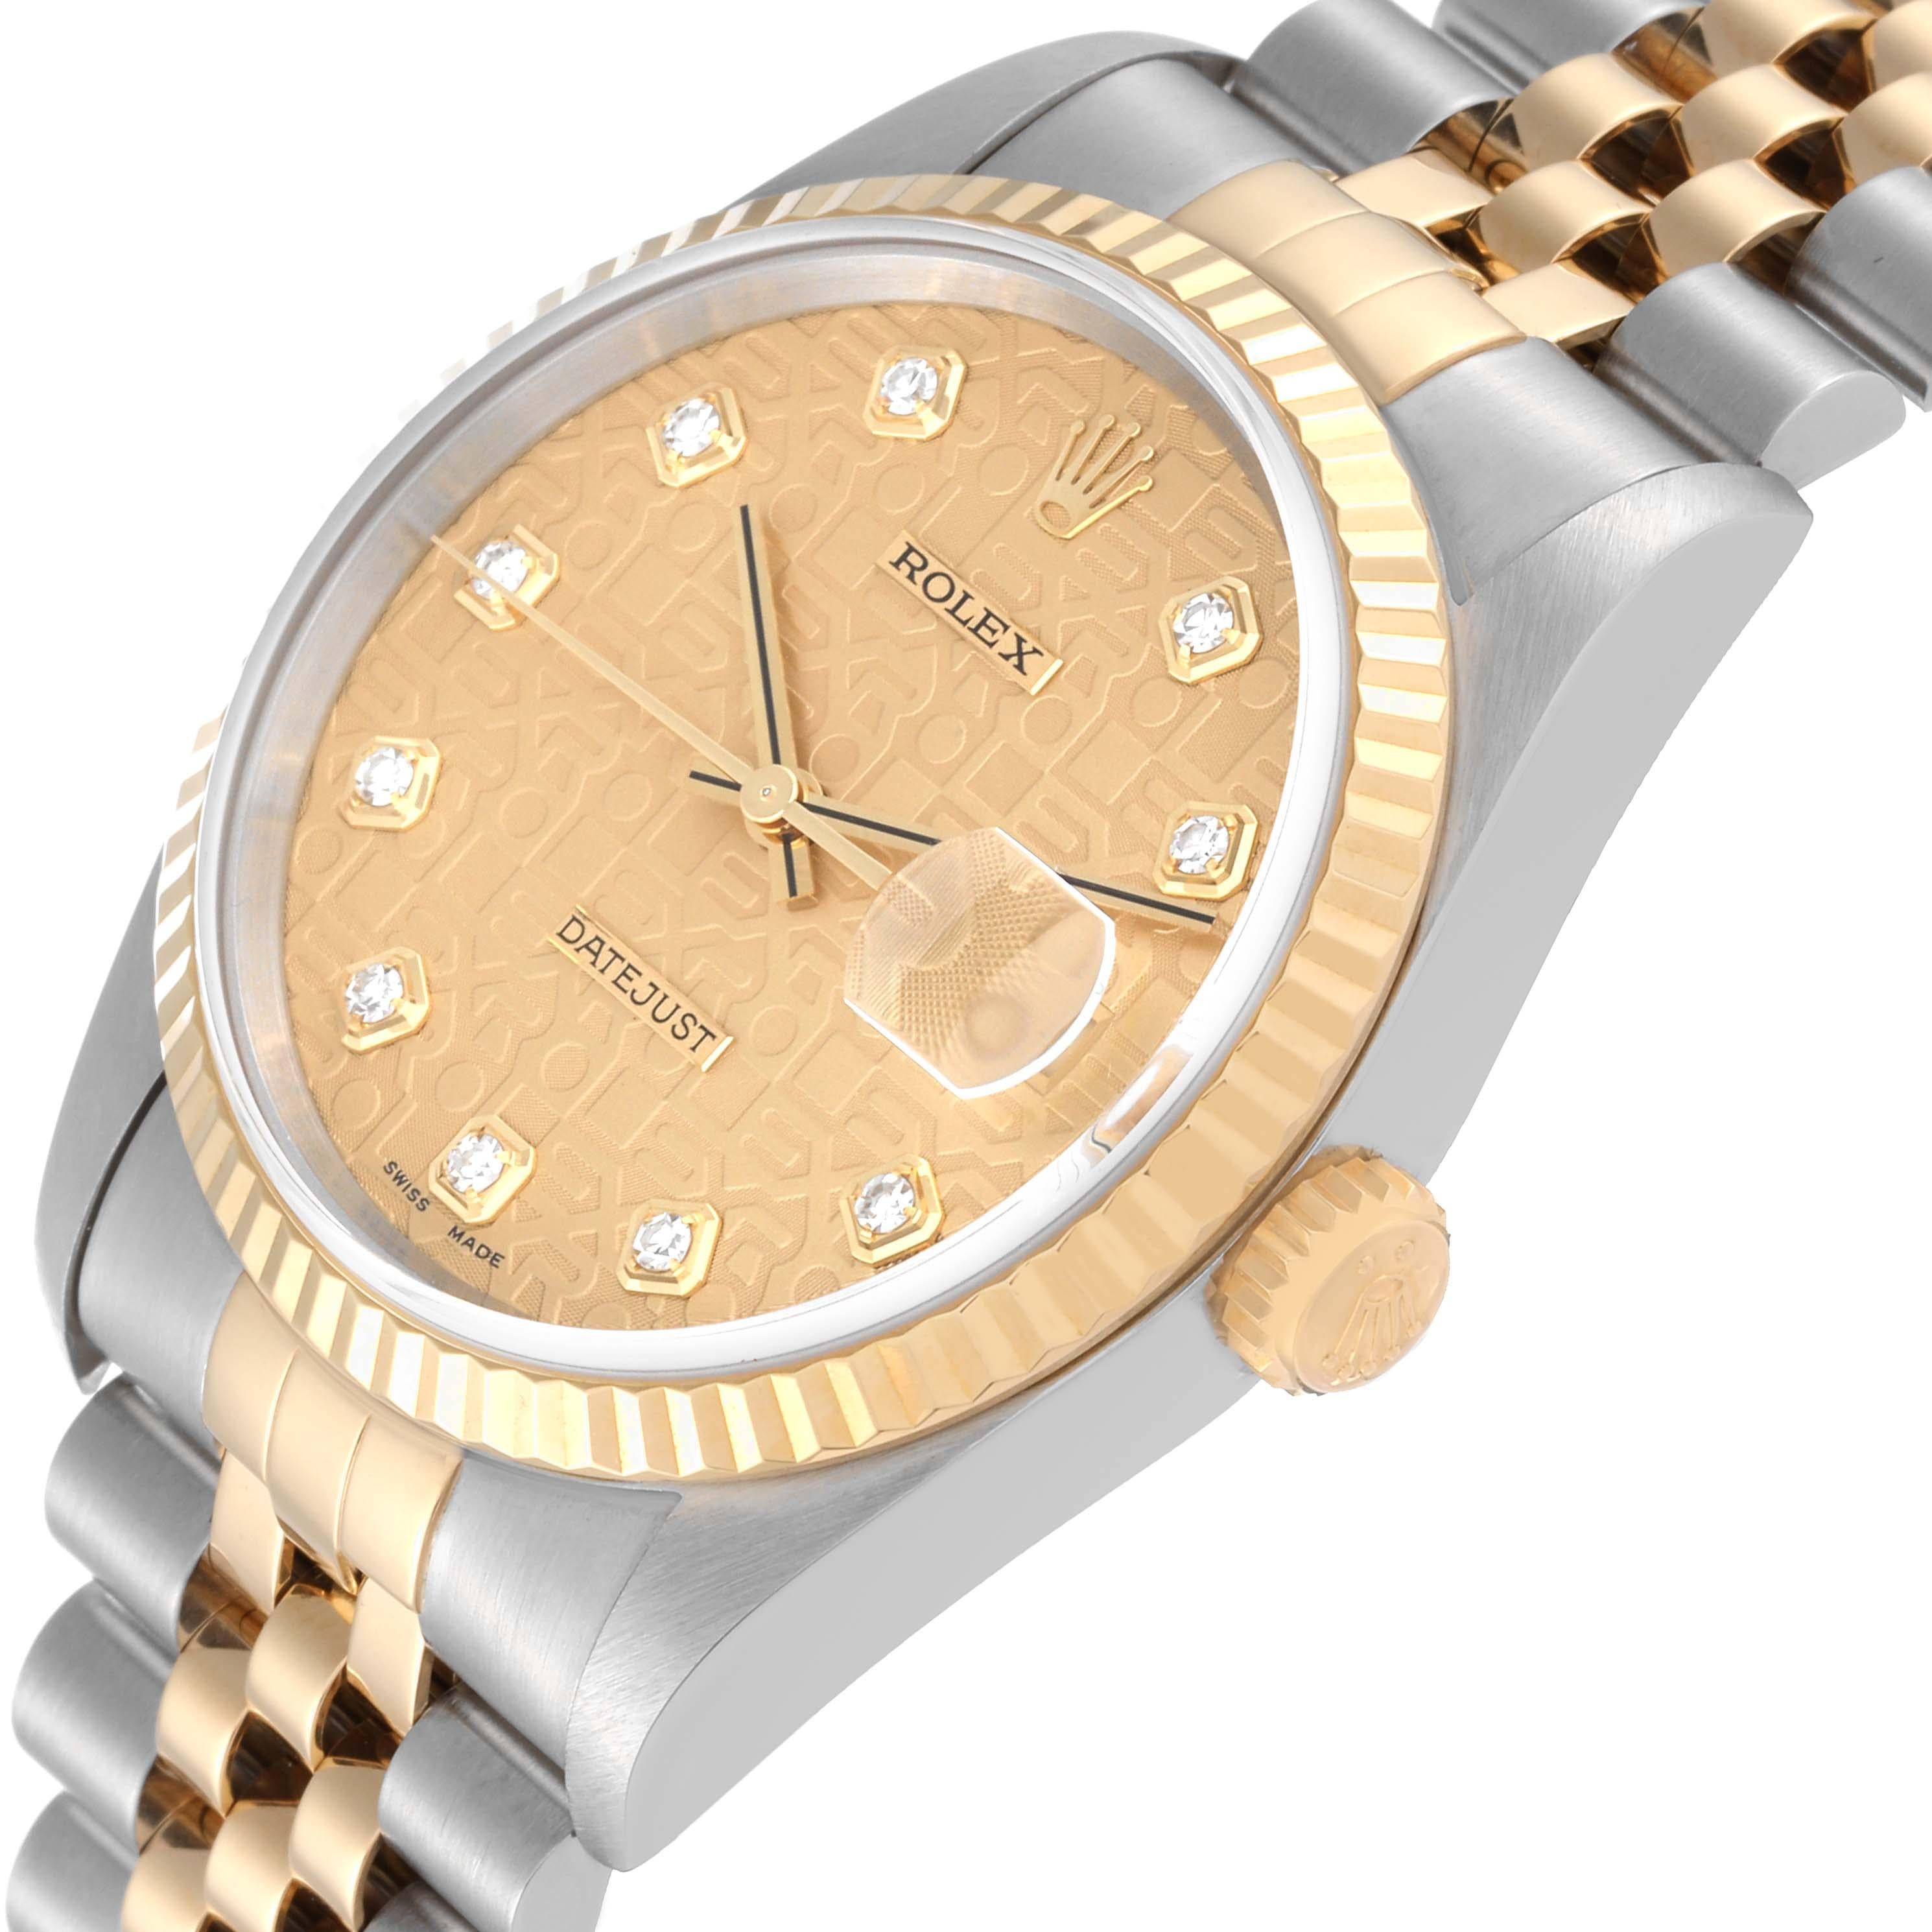 Rolex Datejust Steel Yellow Gold Diamond Anniversary Dial Mens Watch 16233 For Sale 1